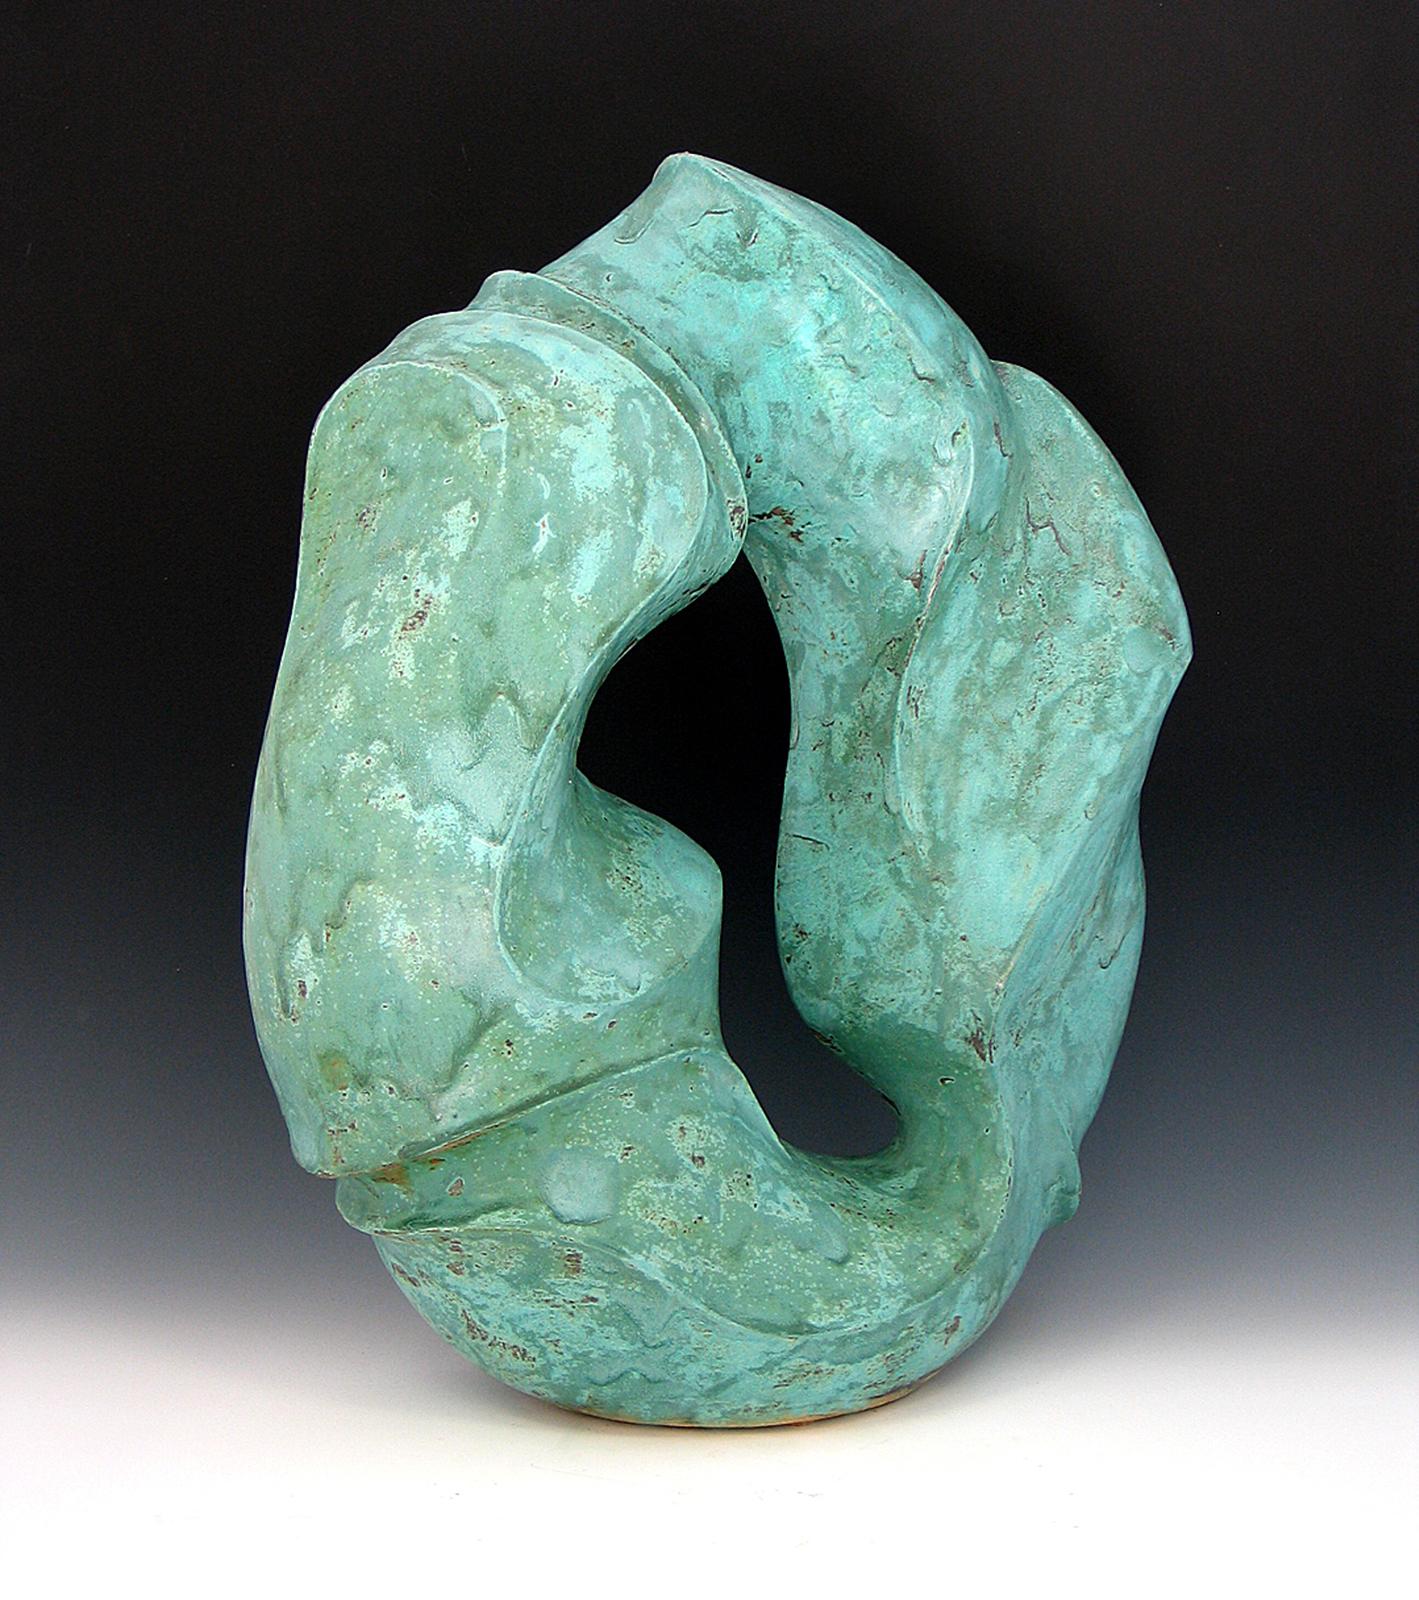 “Water’s Way”, bright aqua  ceramic with swirling marks, displays flowing movement of water in shape and surface. Always looking for new materials and methods, the artist has made sculpture in such diverse materials as wood, metal, concrete,